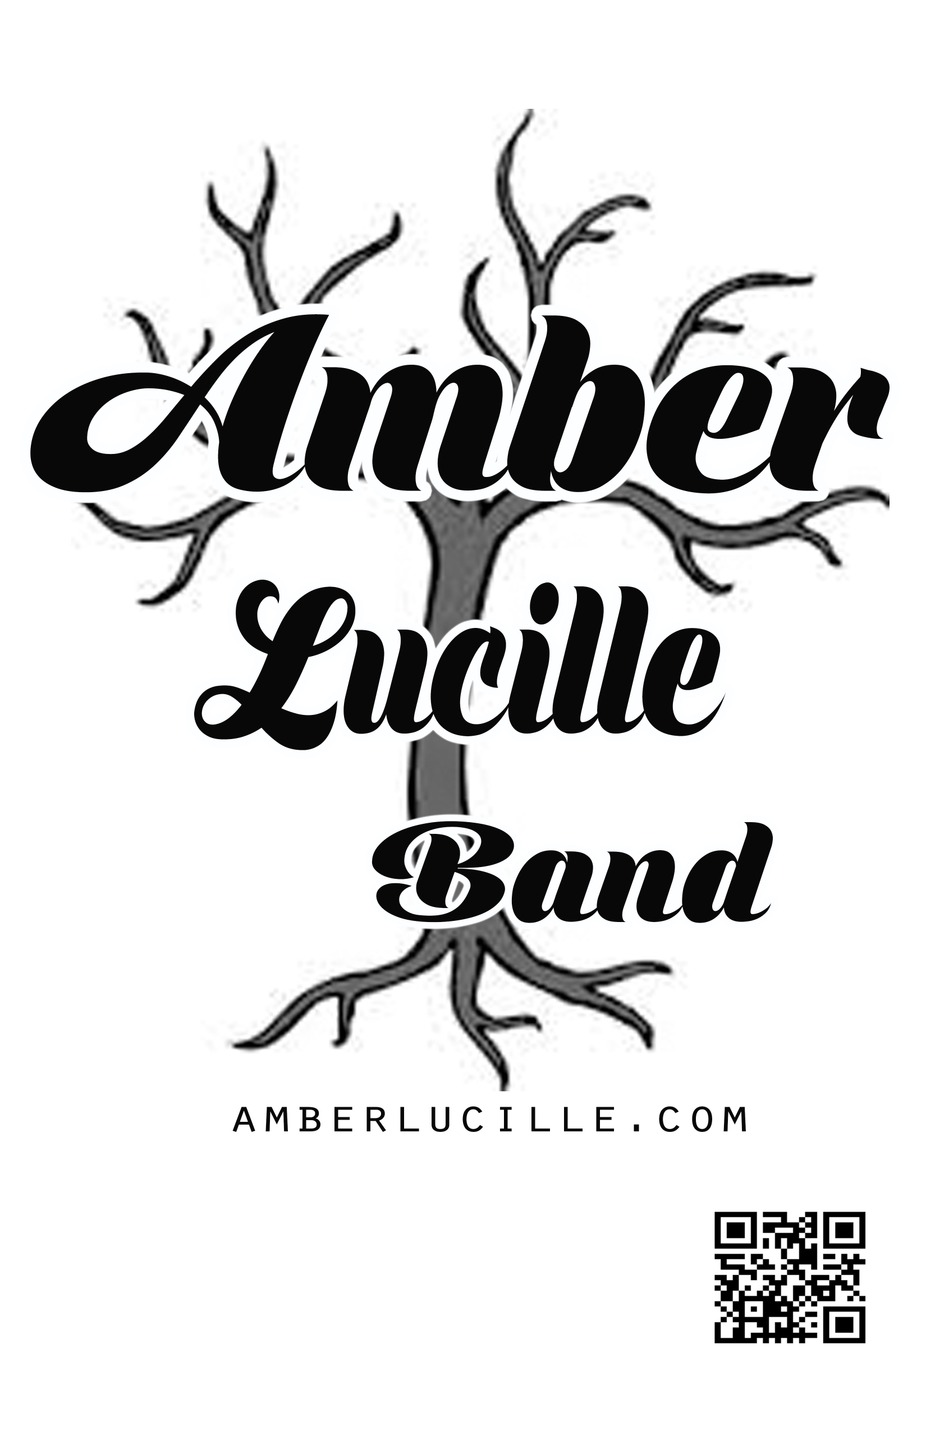 Amber Lucille Band event photo